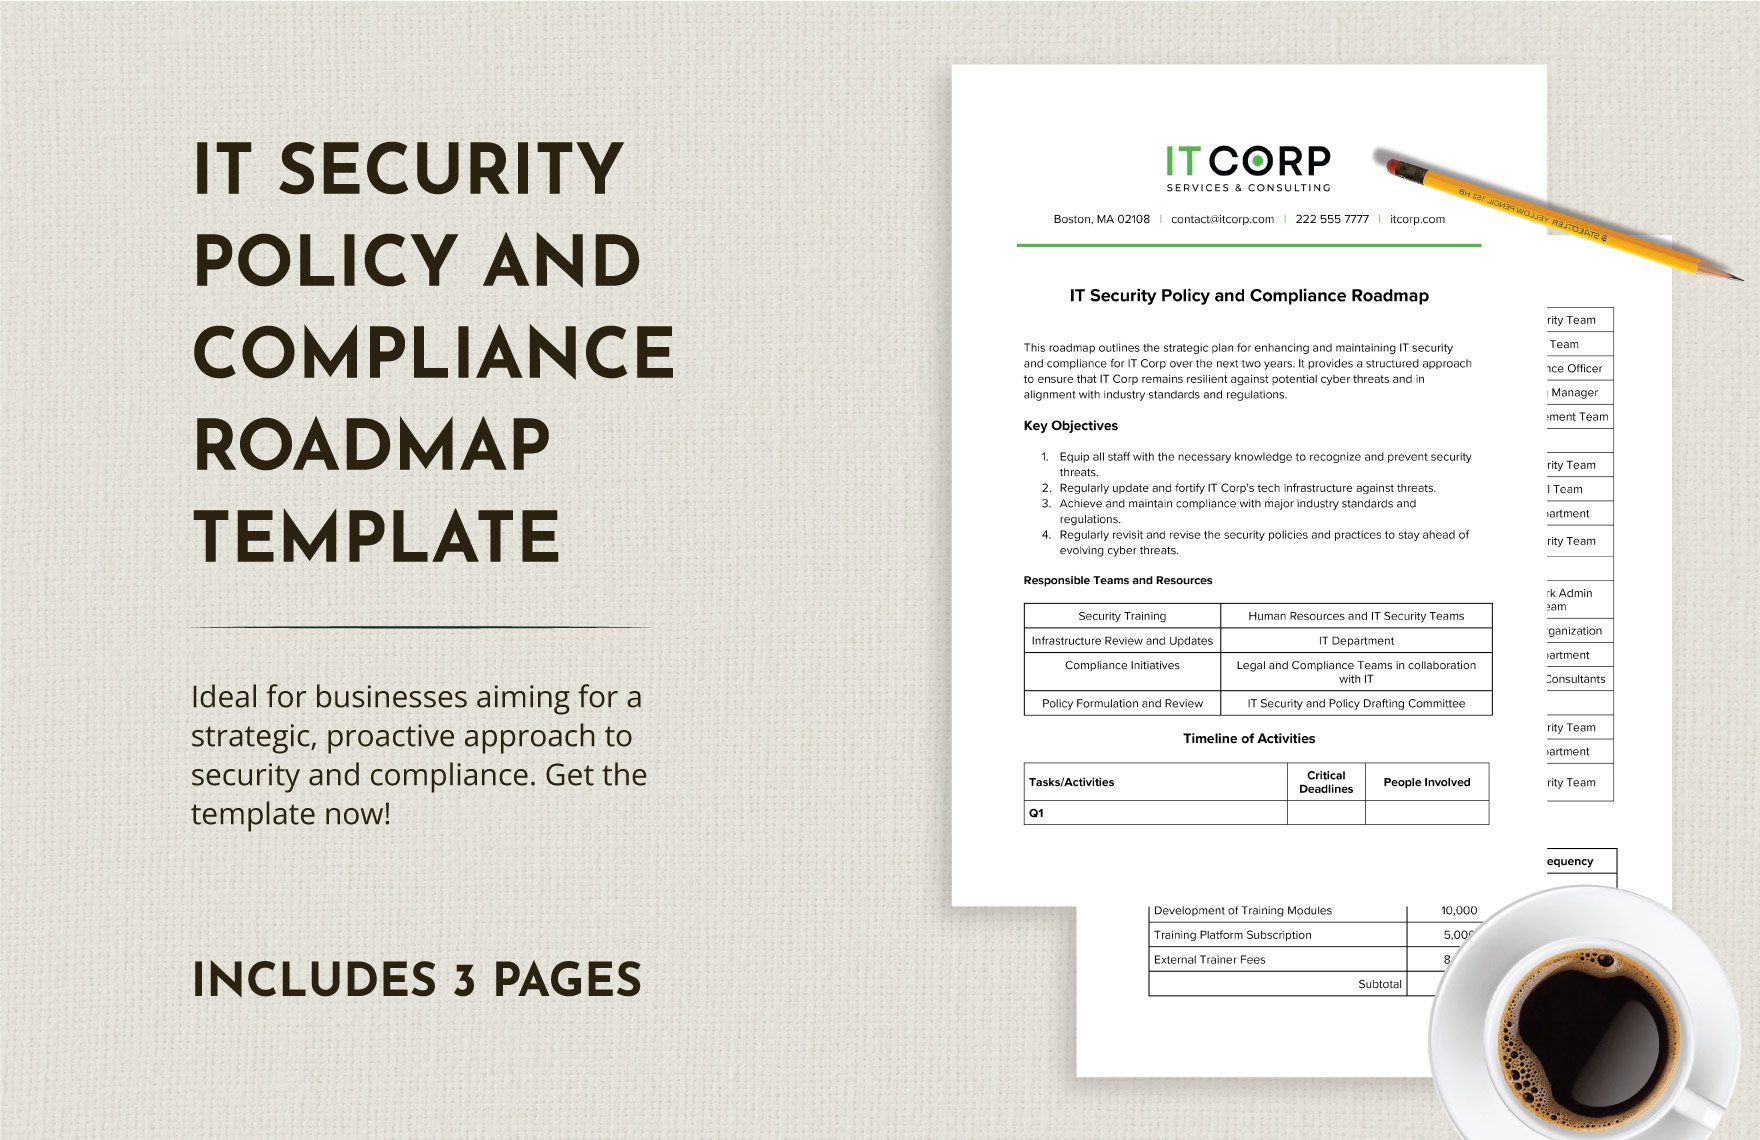 IT Security Policy and Compliance Roadmap Template